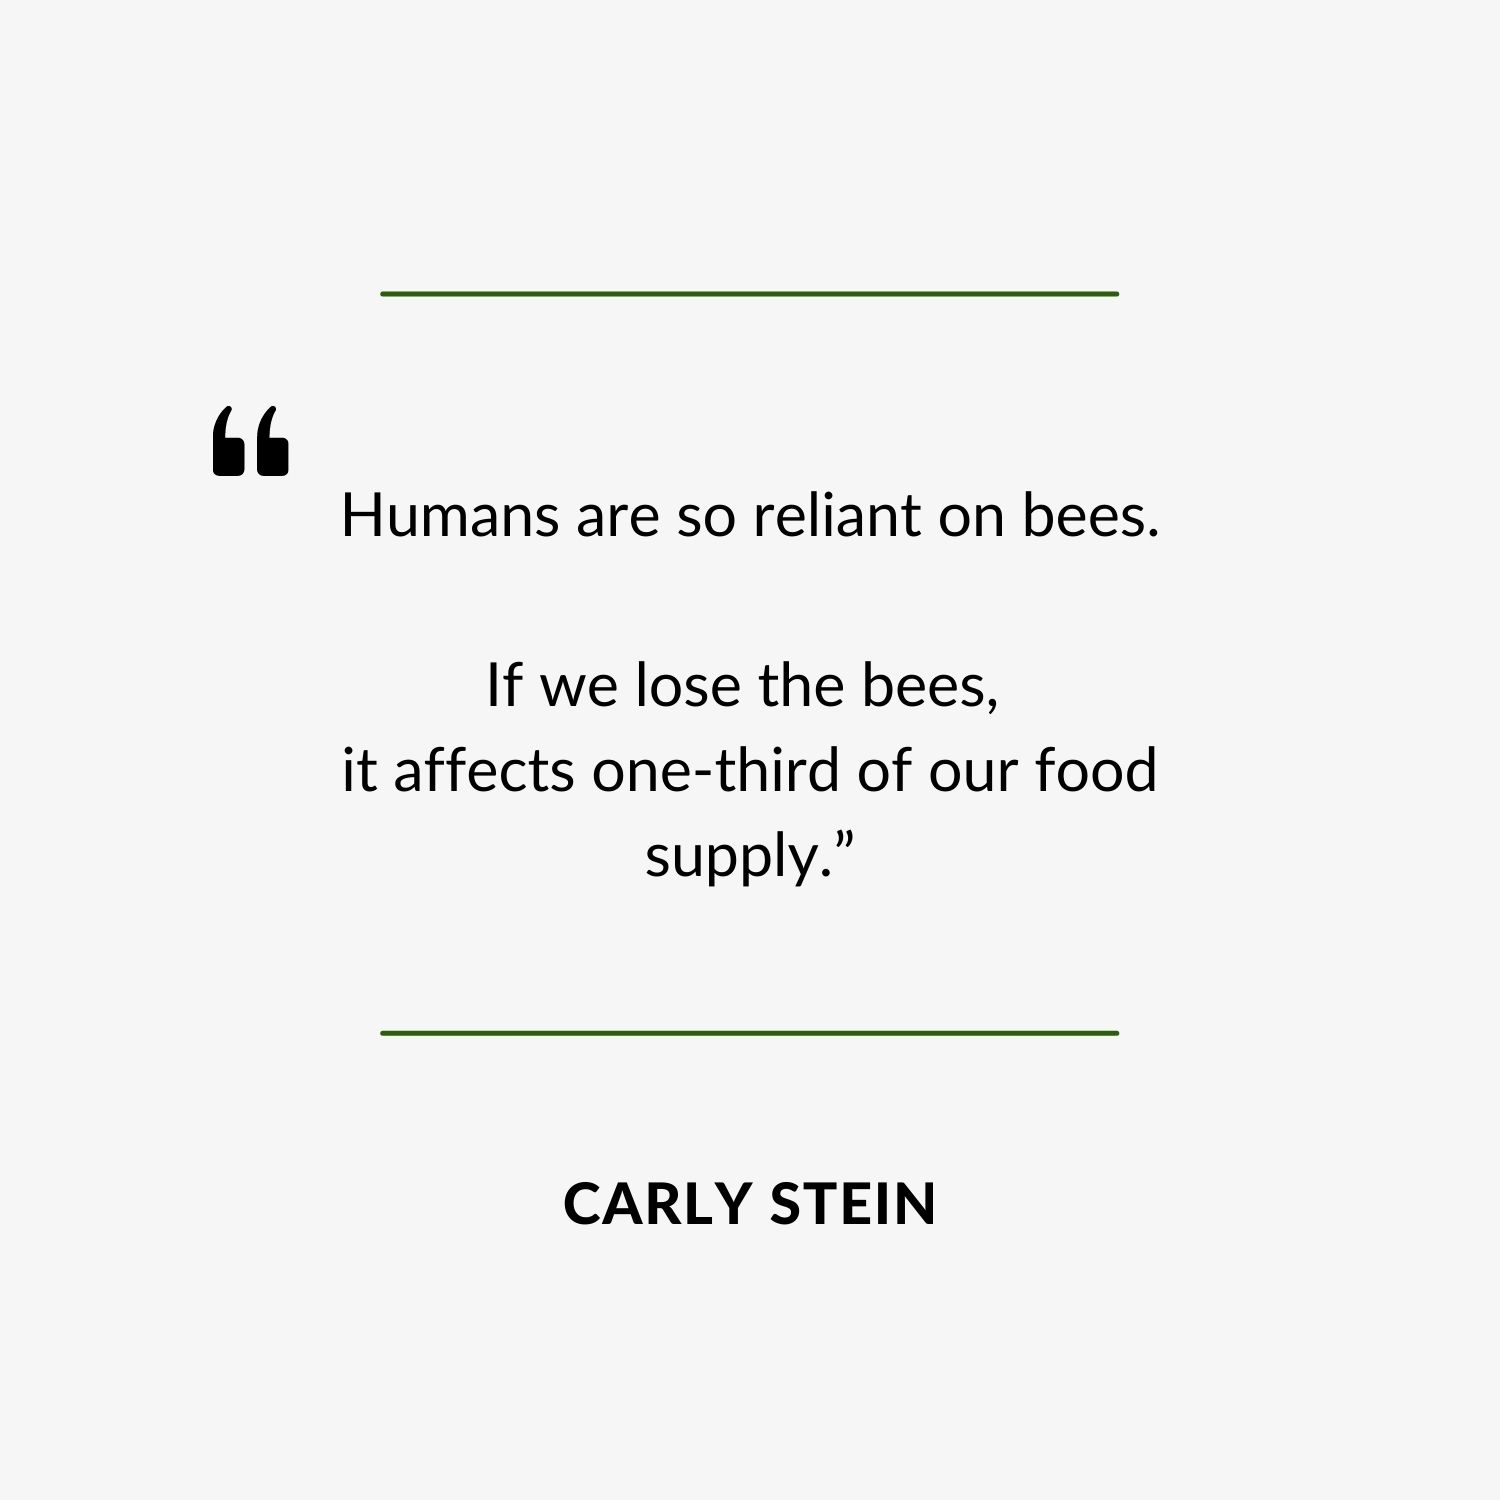 Quote - “Humans are so reliant on bees. If we lose the bees, it affects one-third of our food supply.”